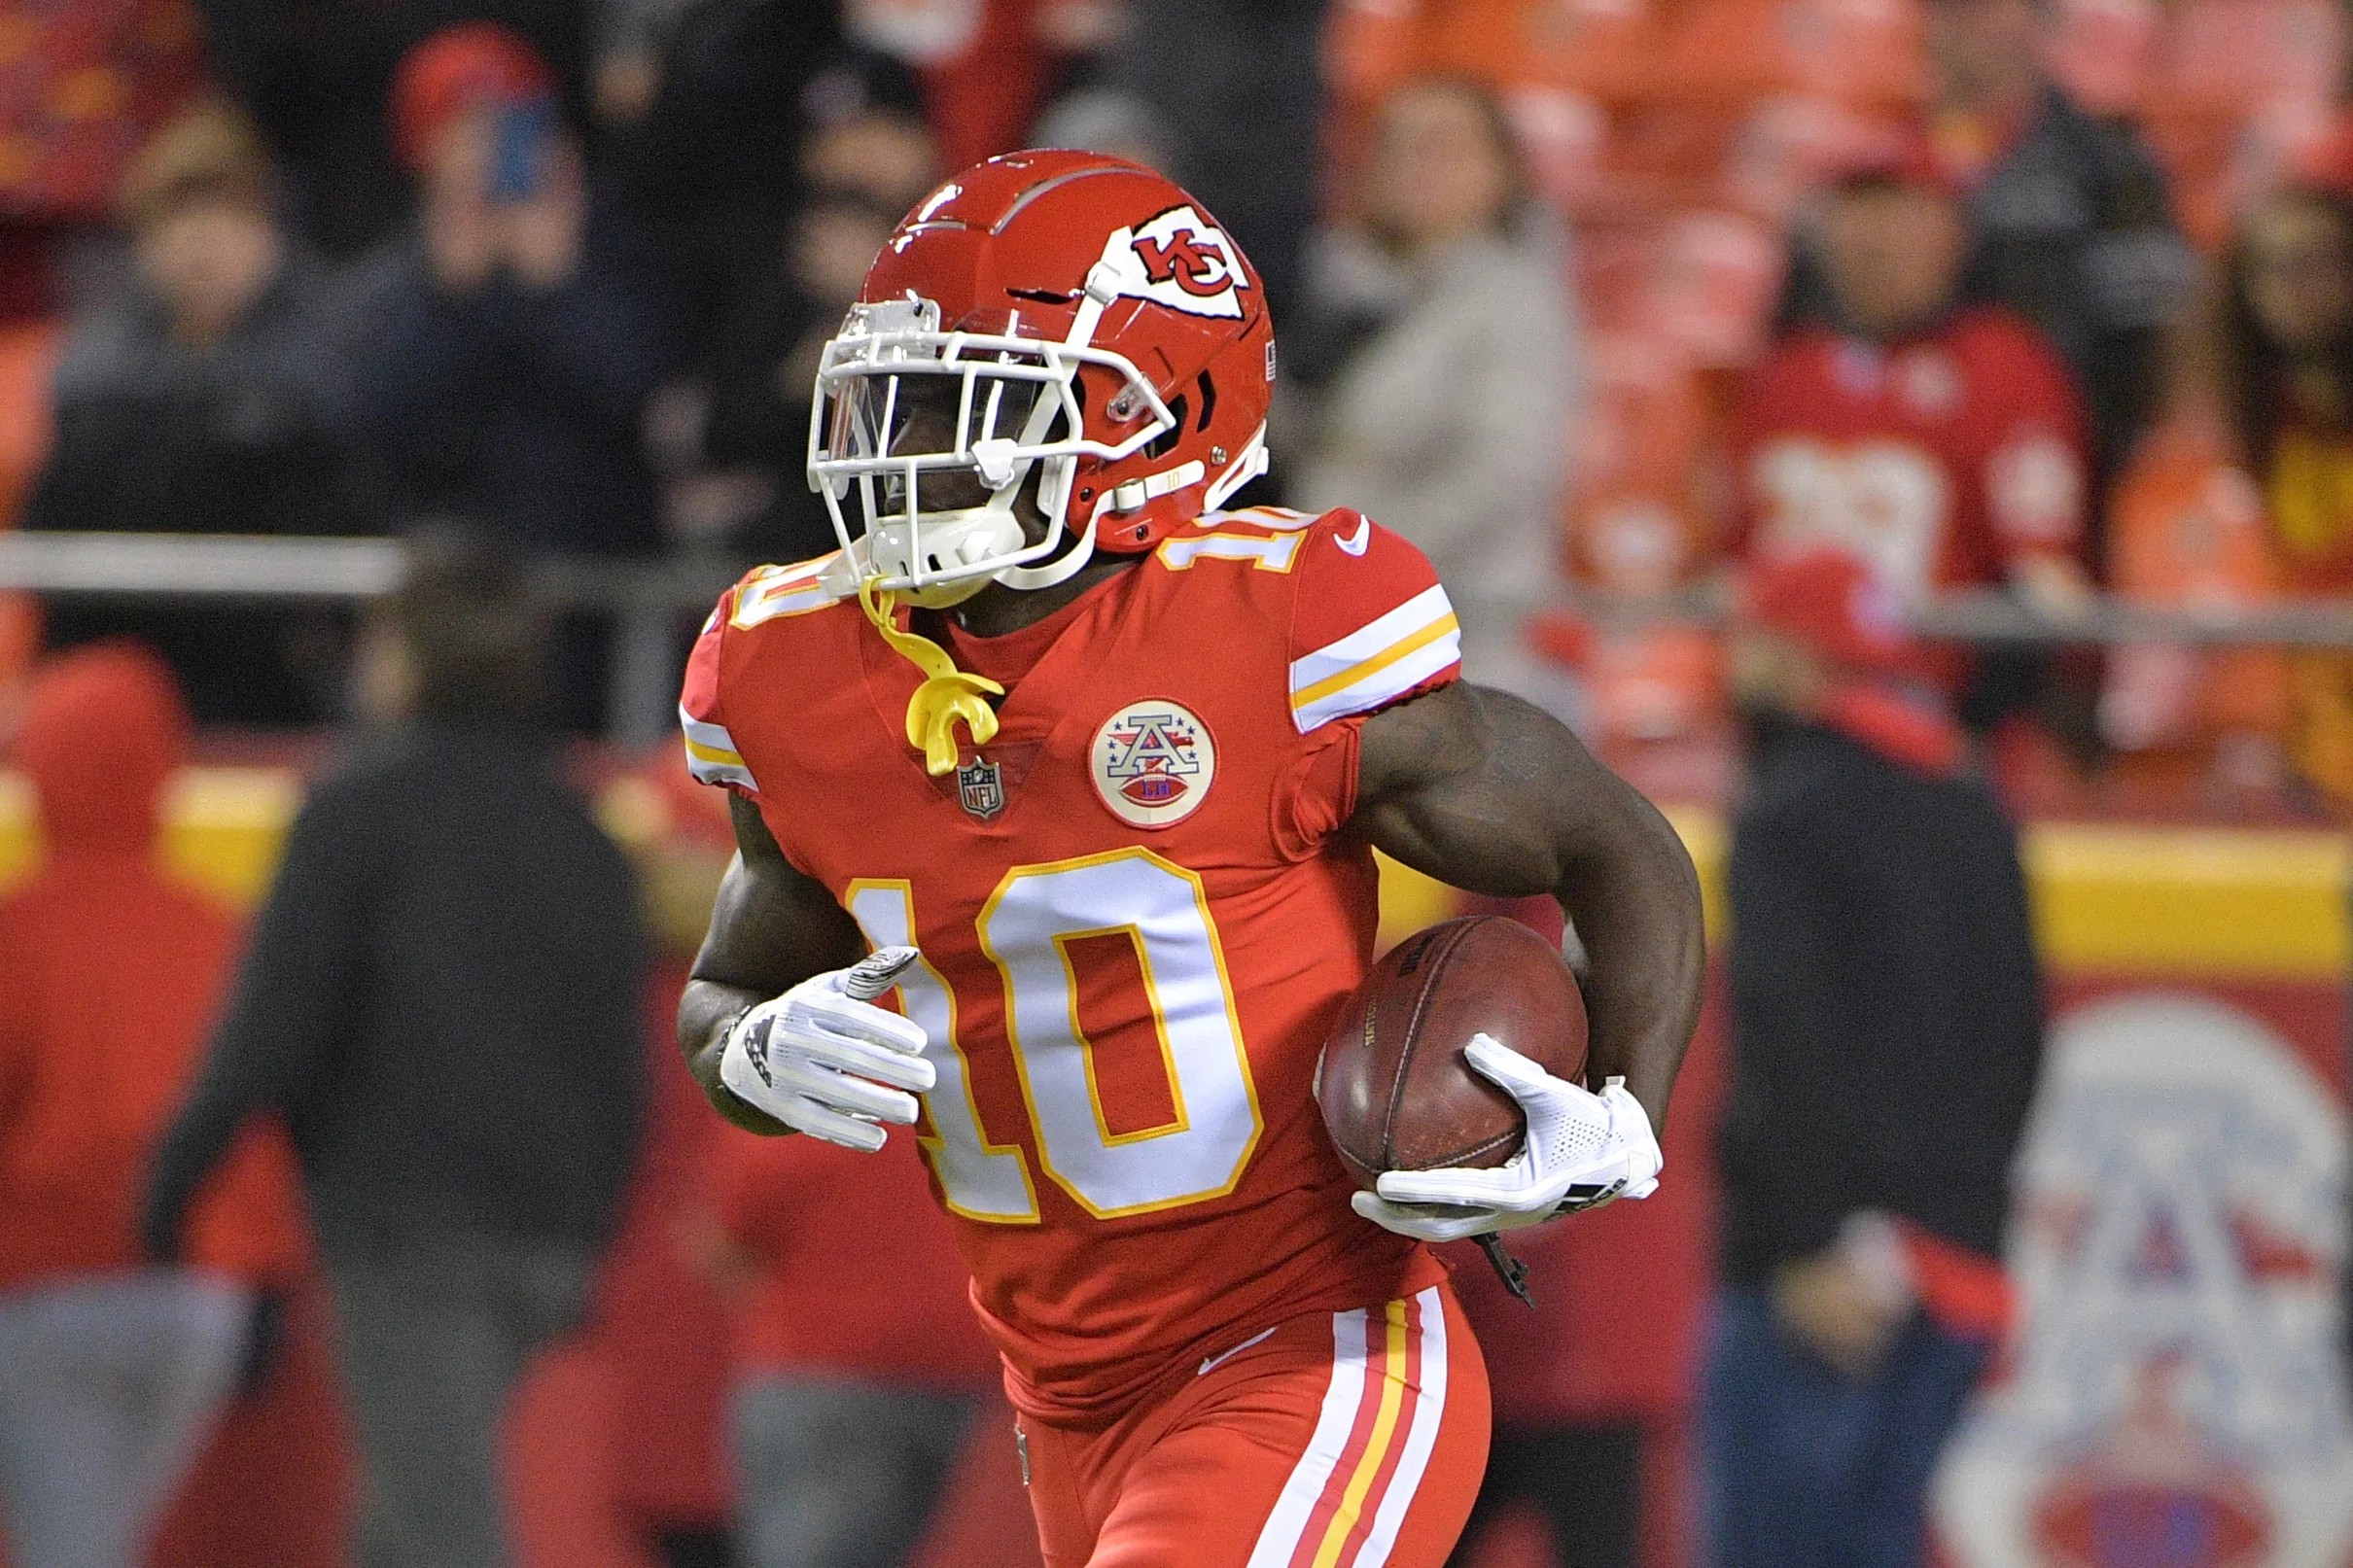 Report: Tyreek Hill temporarily lost custody of 3-year-old son